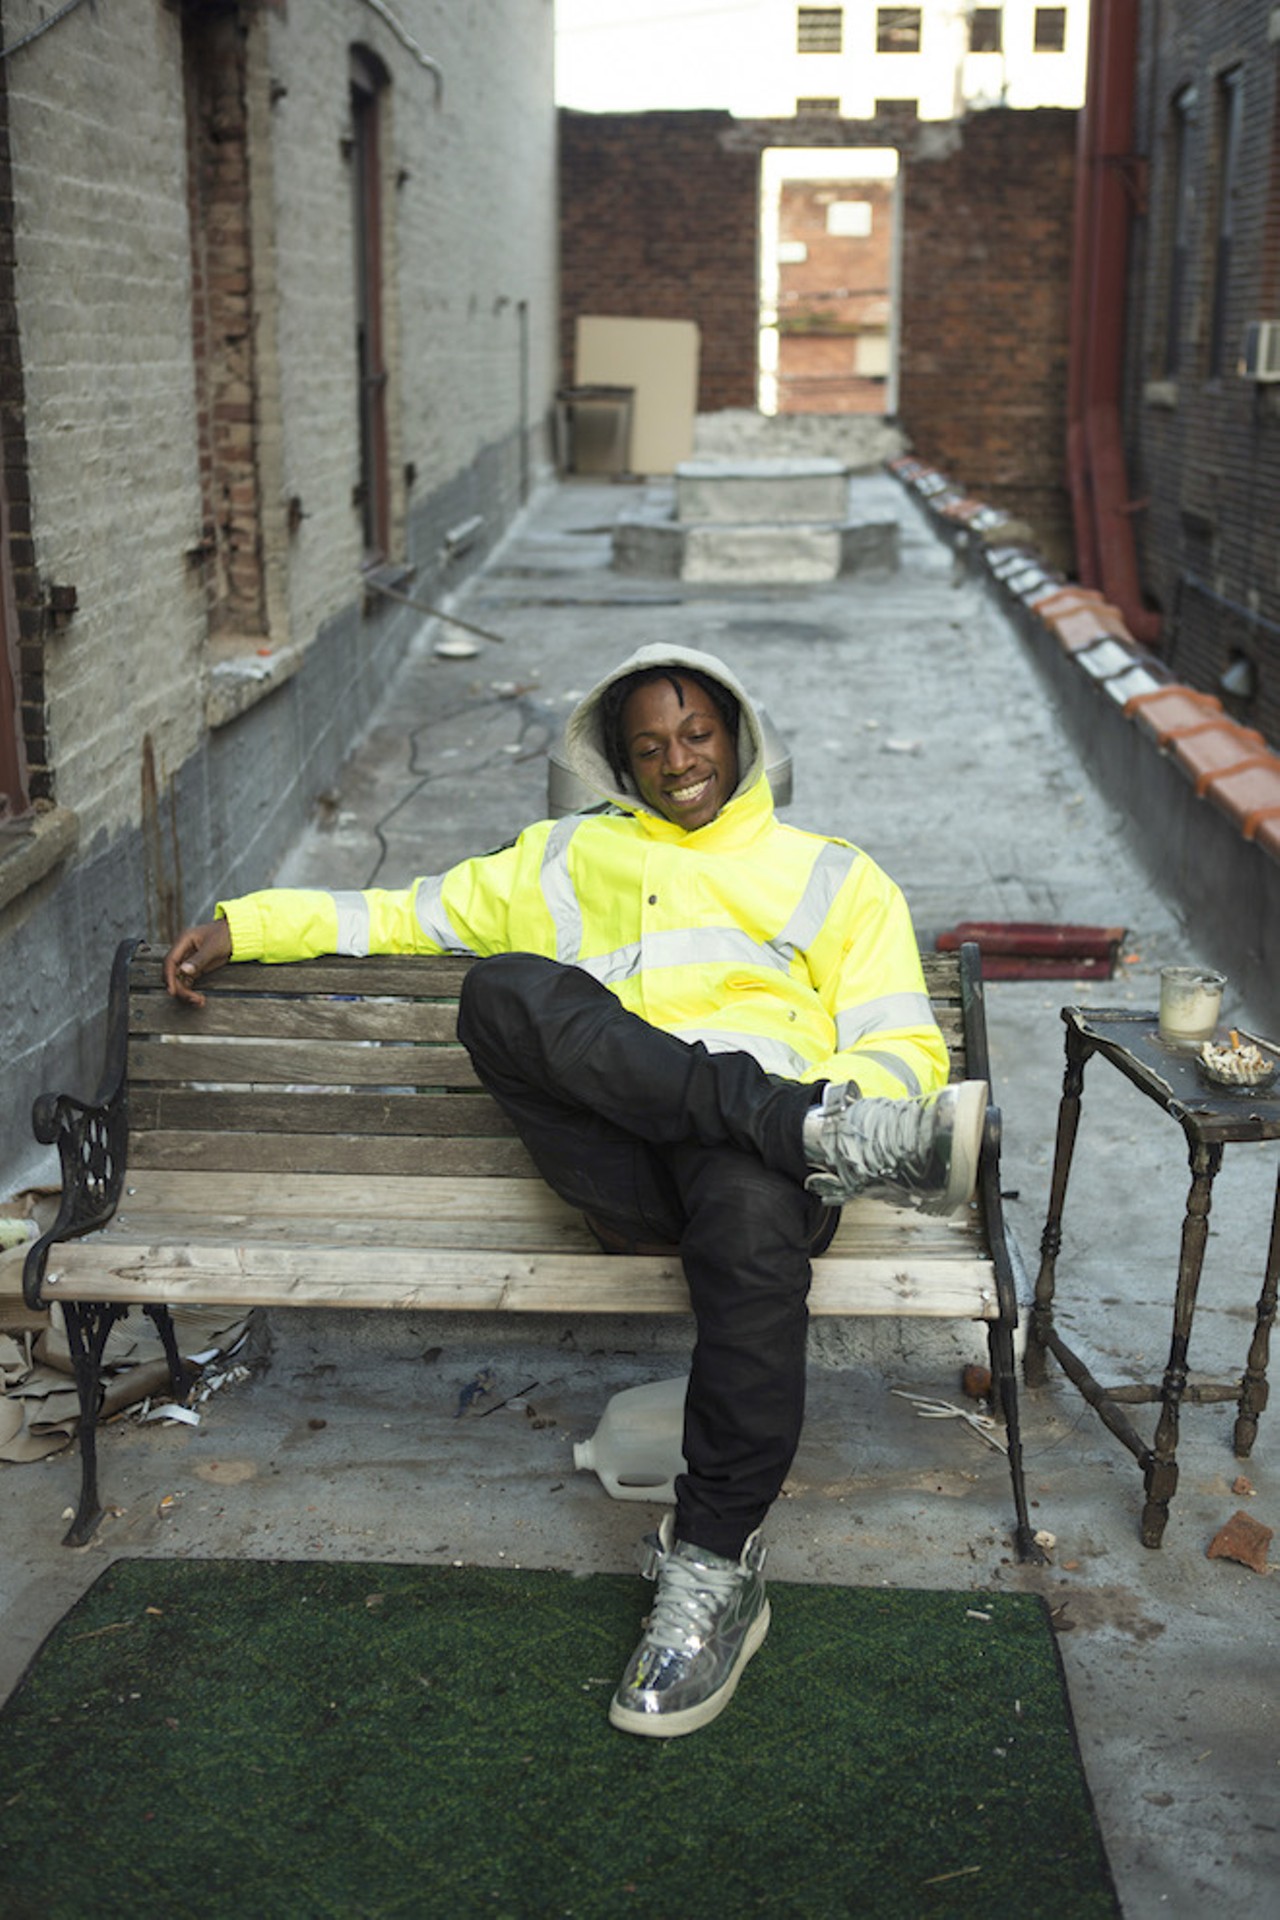 Joey Bada$$
8 p.m. Oct. 22, at Venue 578, venue578.com, $25-$115
There&#146;s no way you spun Joey Badass&#146; debut studio album, B4.DA.$$, and didn&#146;t immediately nestle into its old-school bump. The young rapper gets criticized for borrowing too heavily from his influences, but the chewy listen at last properly introduced the rising hip-hop star, no matter what growing pains you might prescribe for any stylistic lack on the otherwise critically praised release. Joey Badass is exactly the kind of young star we ought to prop up, so go get a piece of his mind and if you&#146;re real gung-ho, spring for the VIP meet-and-greet.Photo by Jessica Lehrman